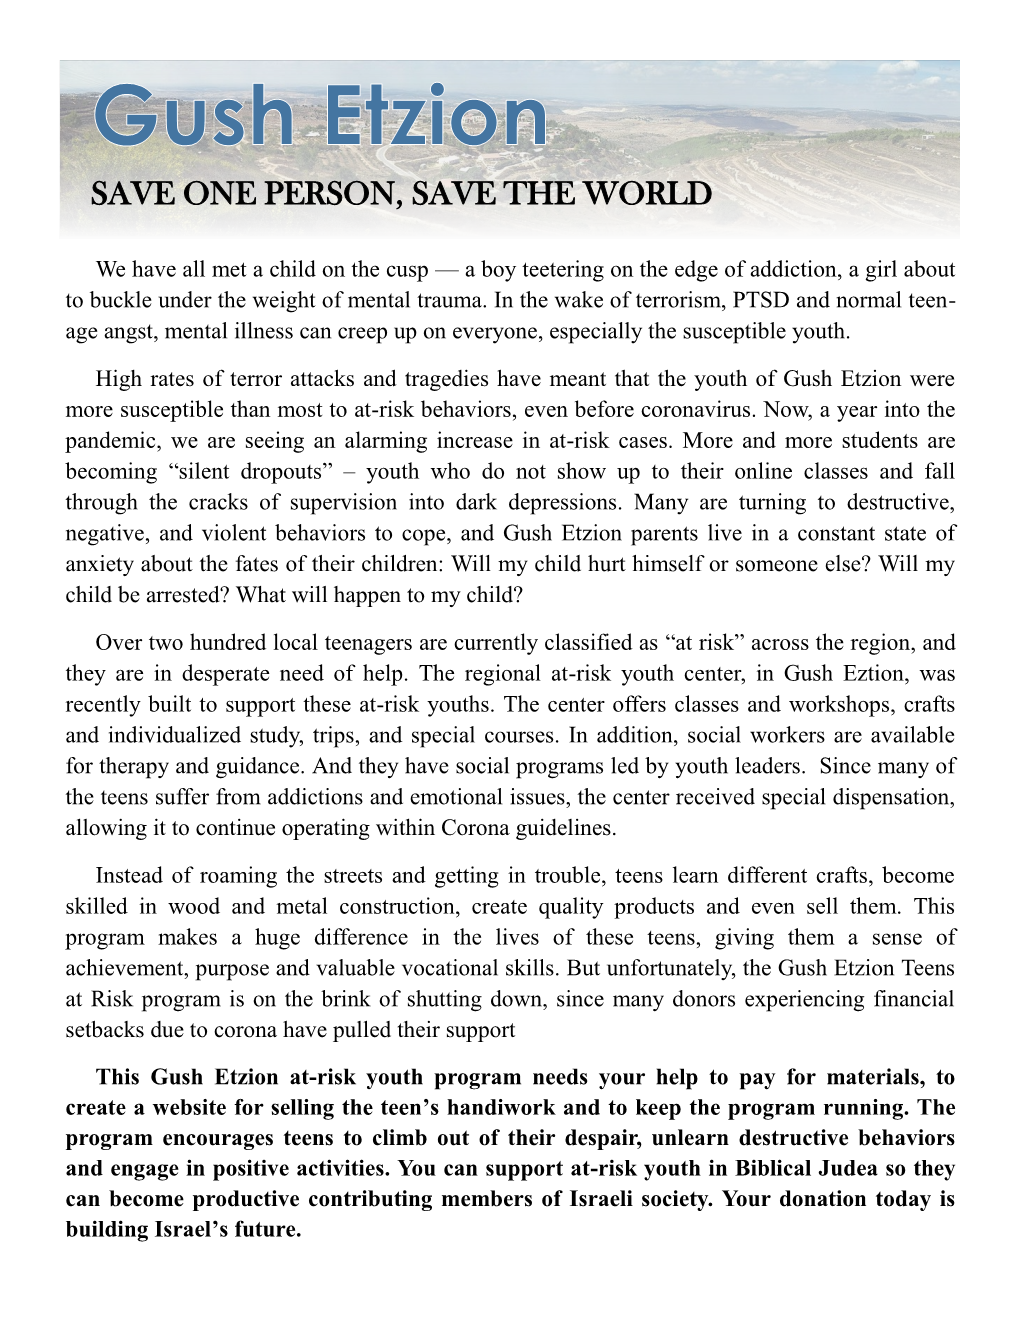 Save One Person, Save the World